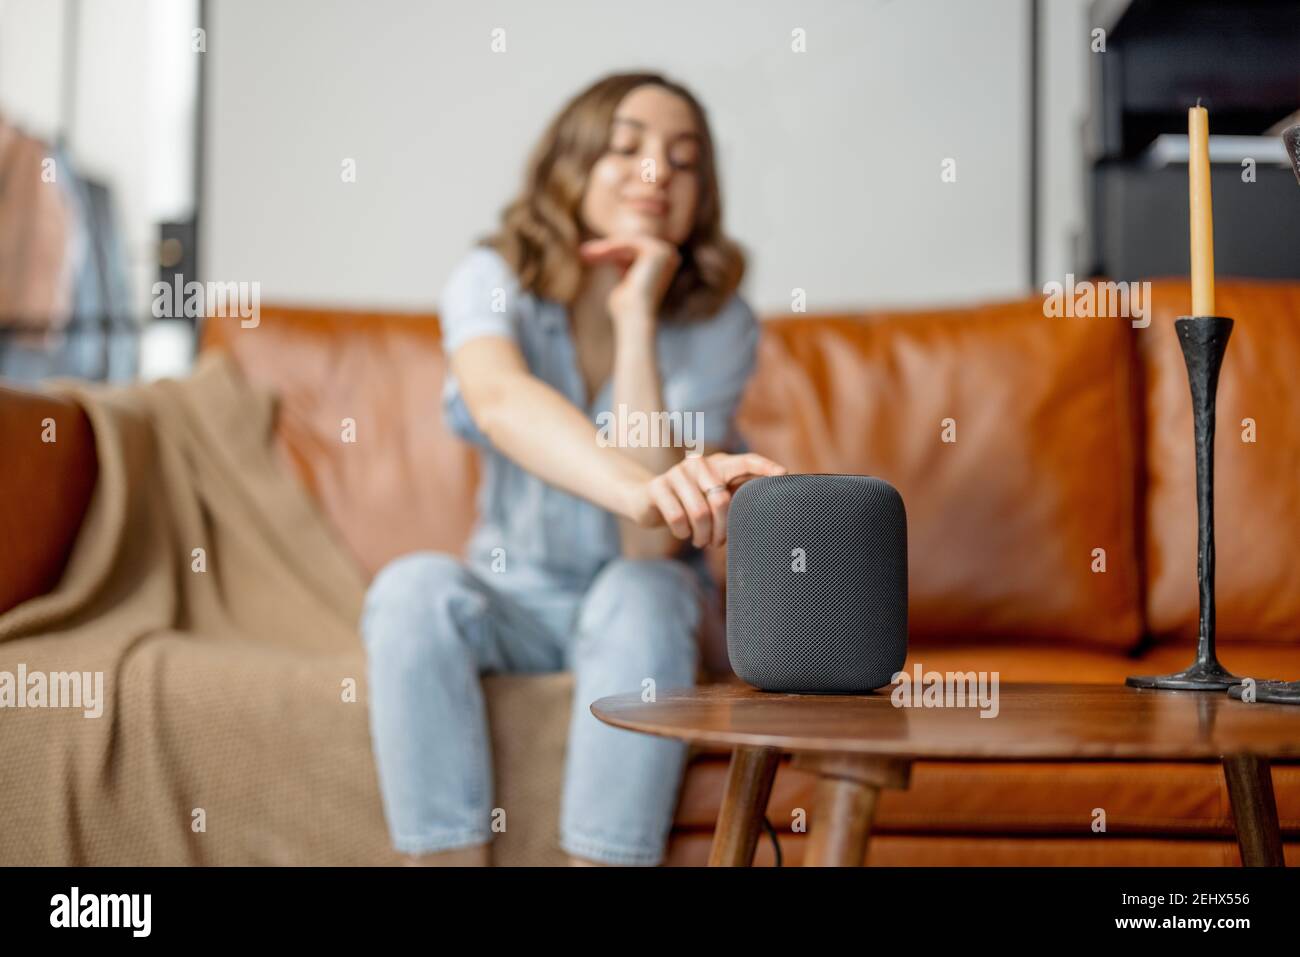 Woman touching black audio assistant column on the coffee table Stock Photo